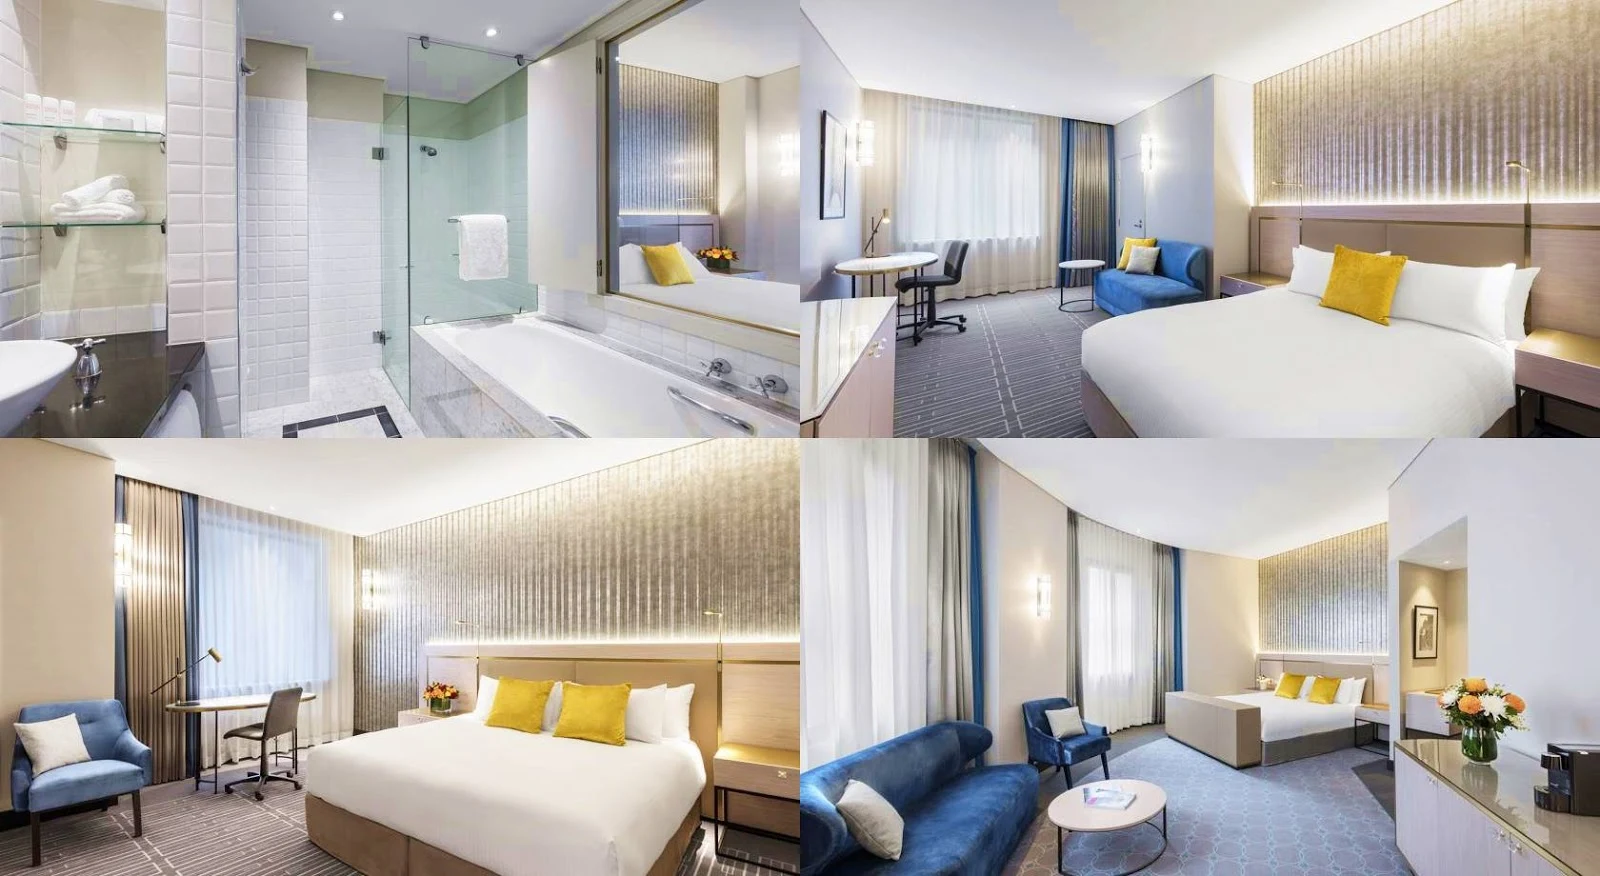 best-hotels-accommodation-apartments-motel-Sydney-city-cbd-darling-harbour-circular-quay-booking-deals-families-holiday-vacation-students-tourists-recommendation